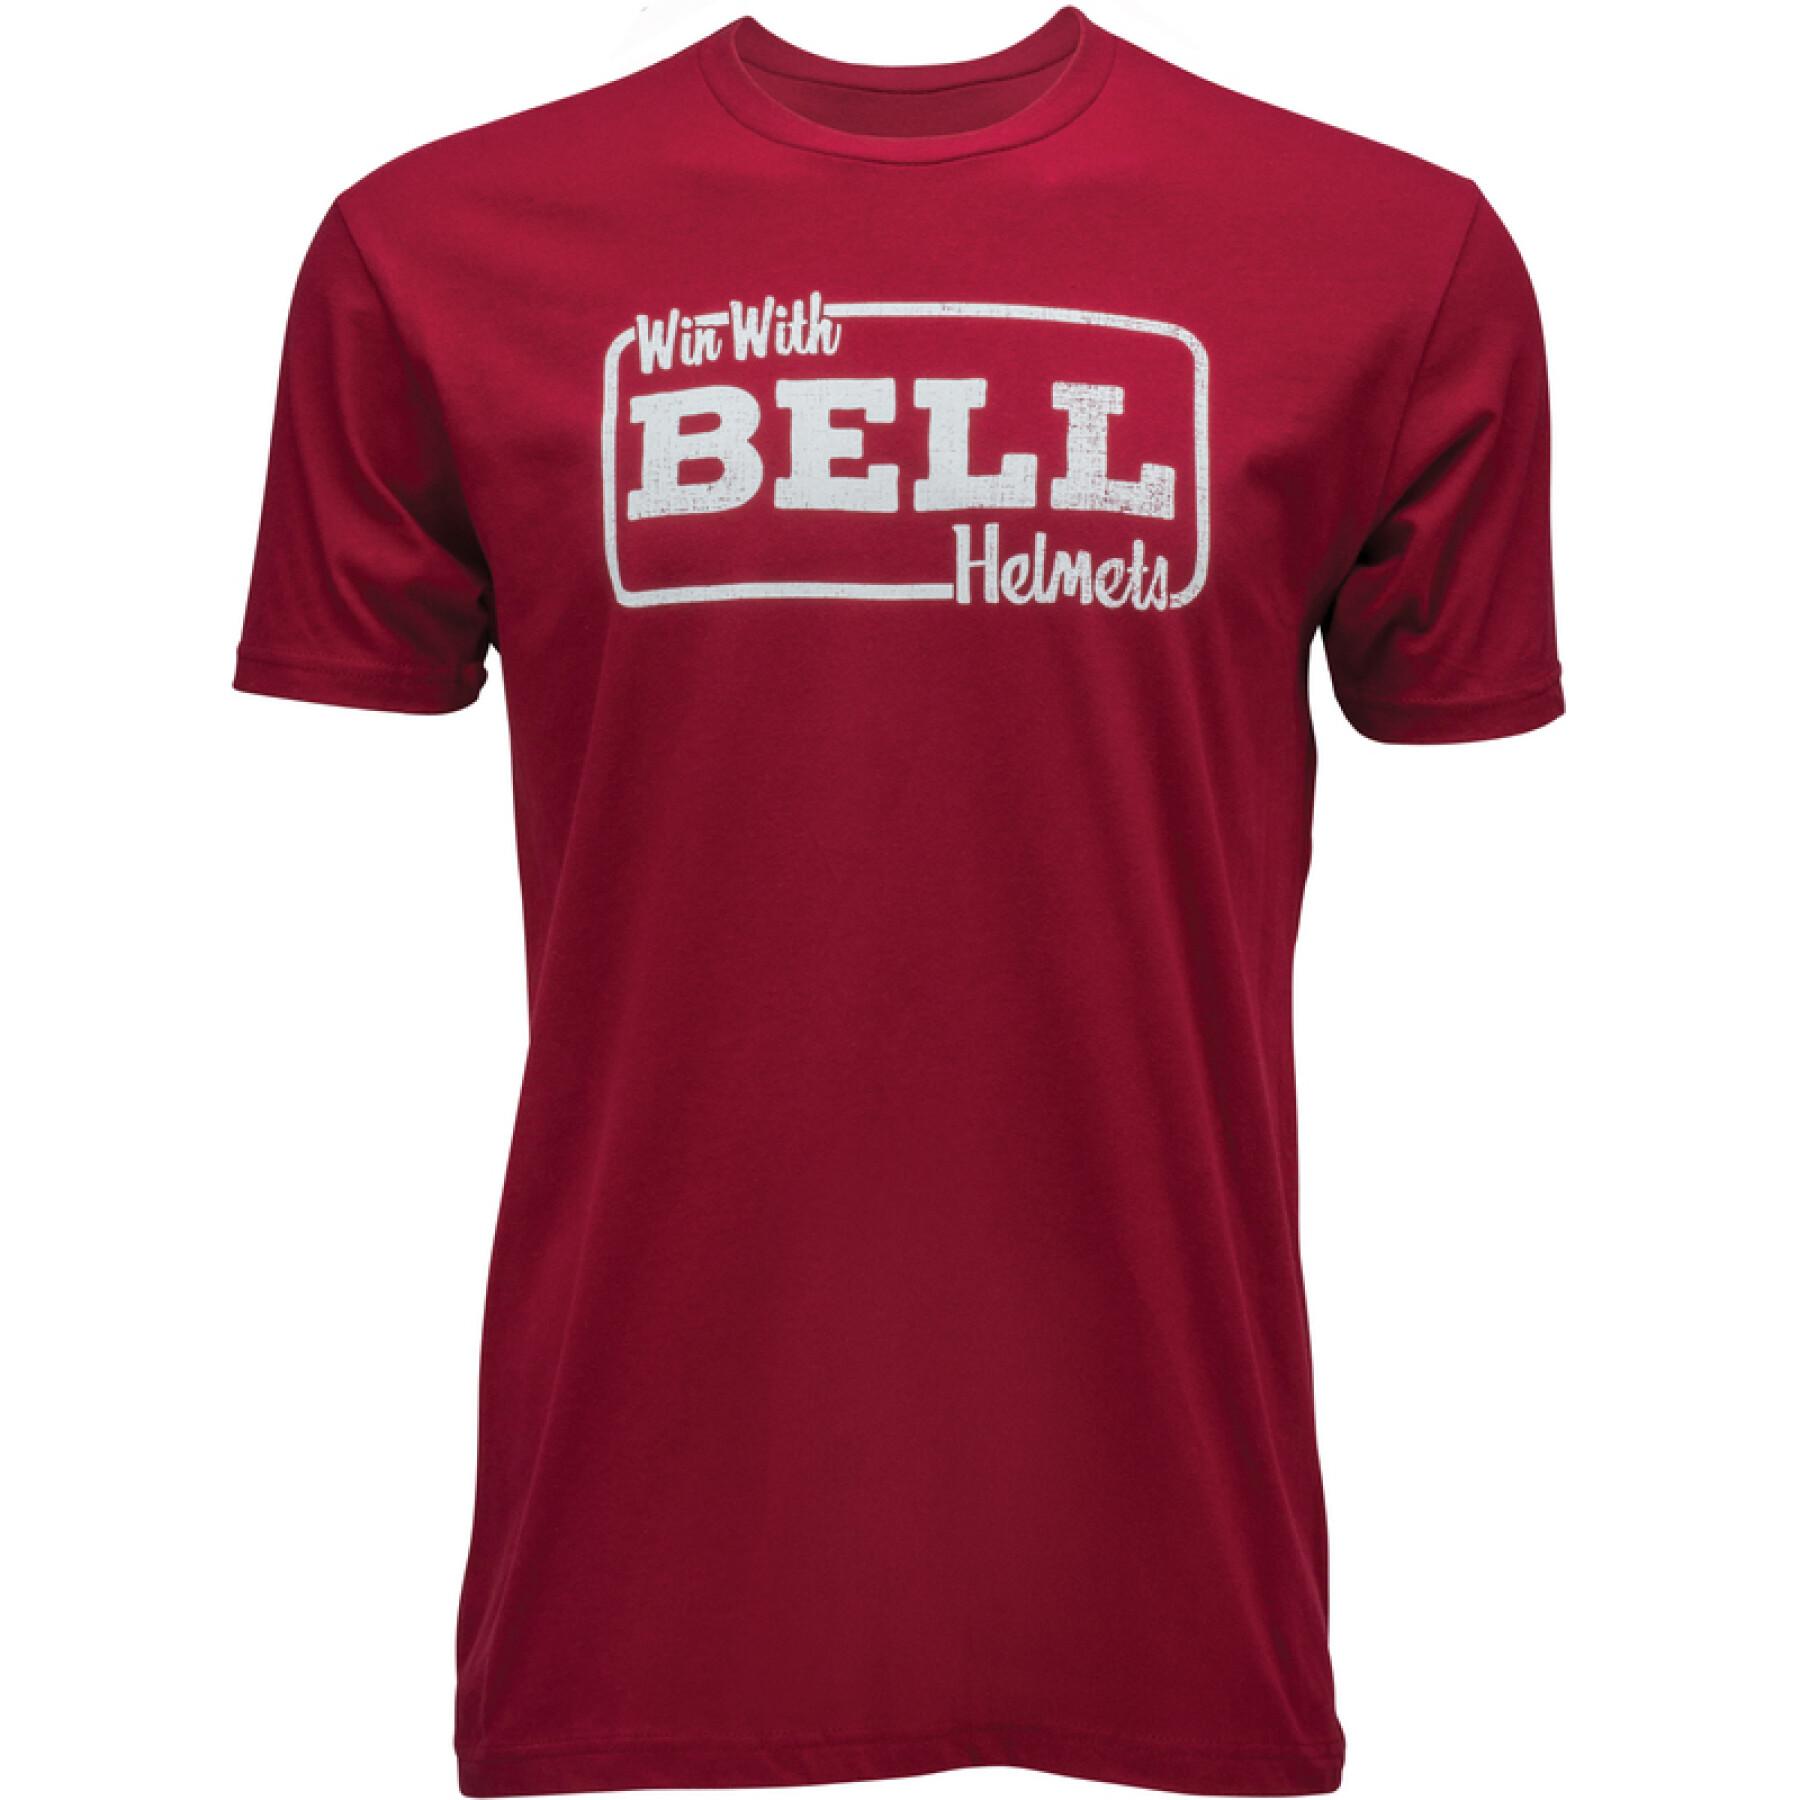 T-shirt Bell Win With